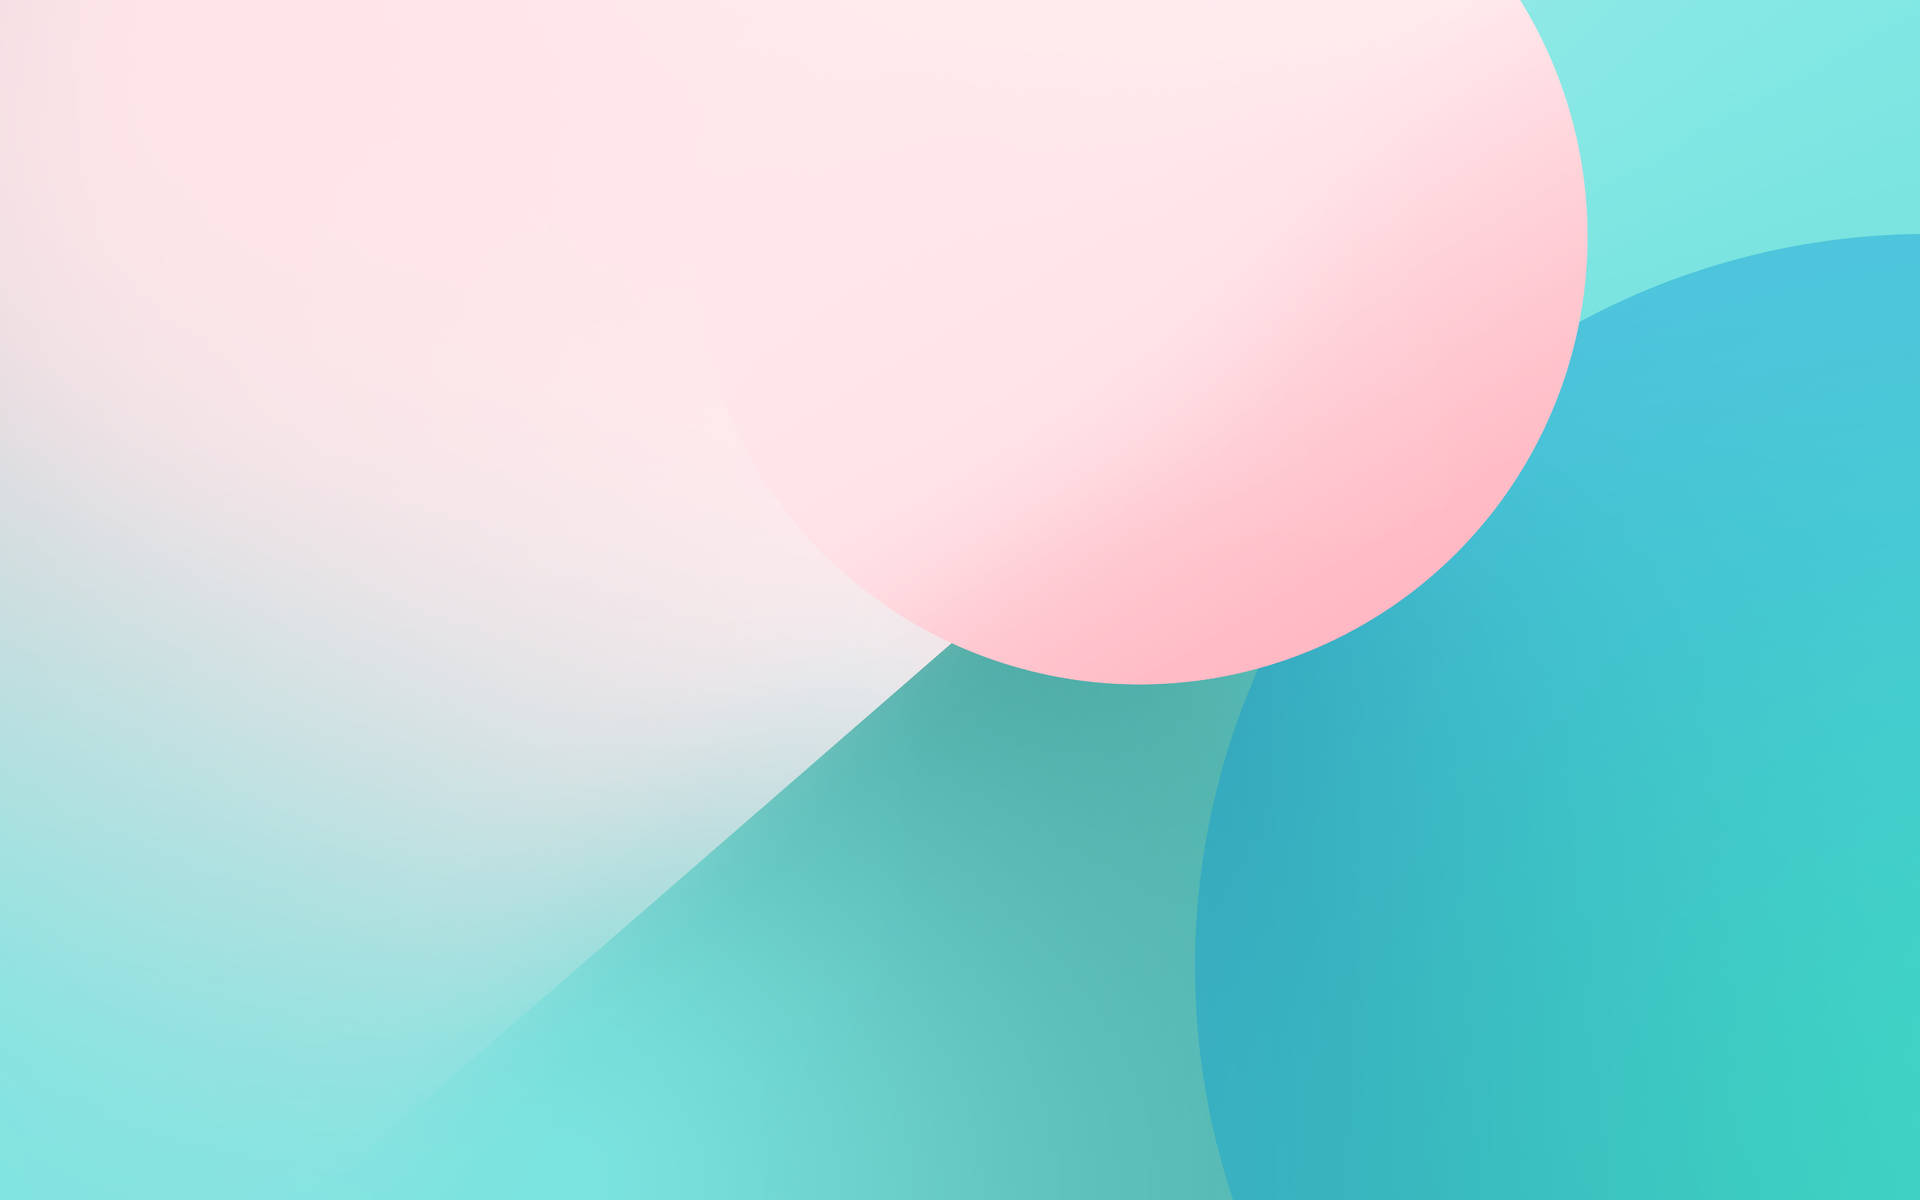 Minimalist Abstract Art In Pastel Colors